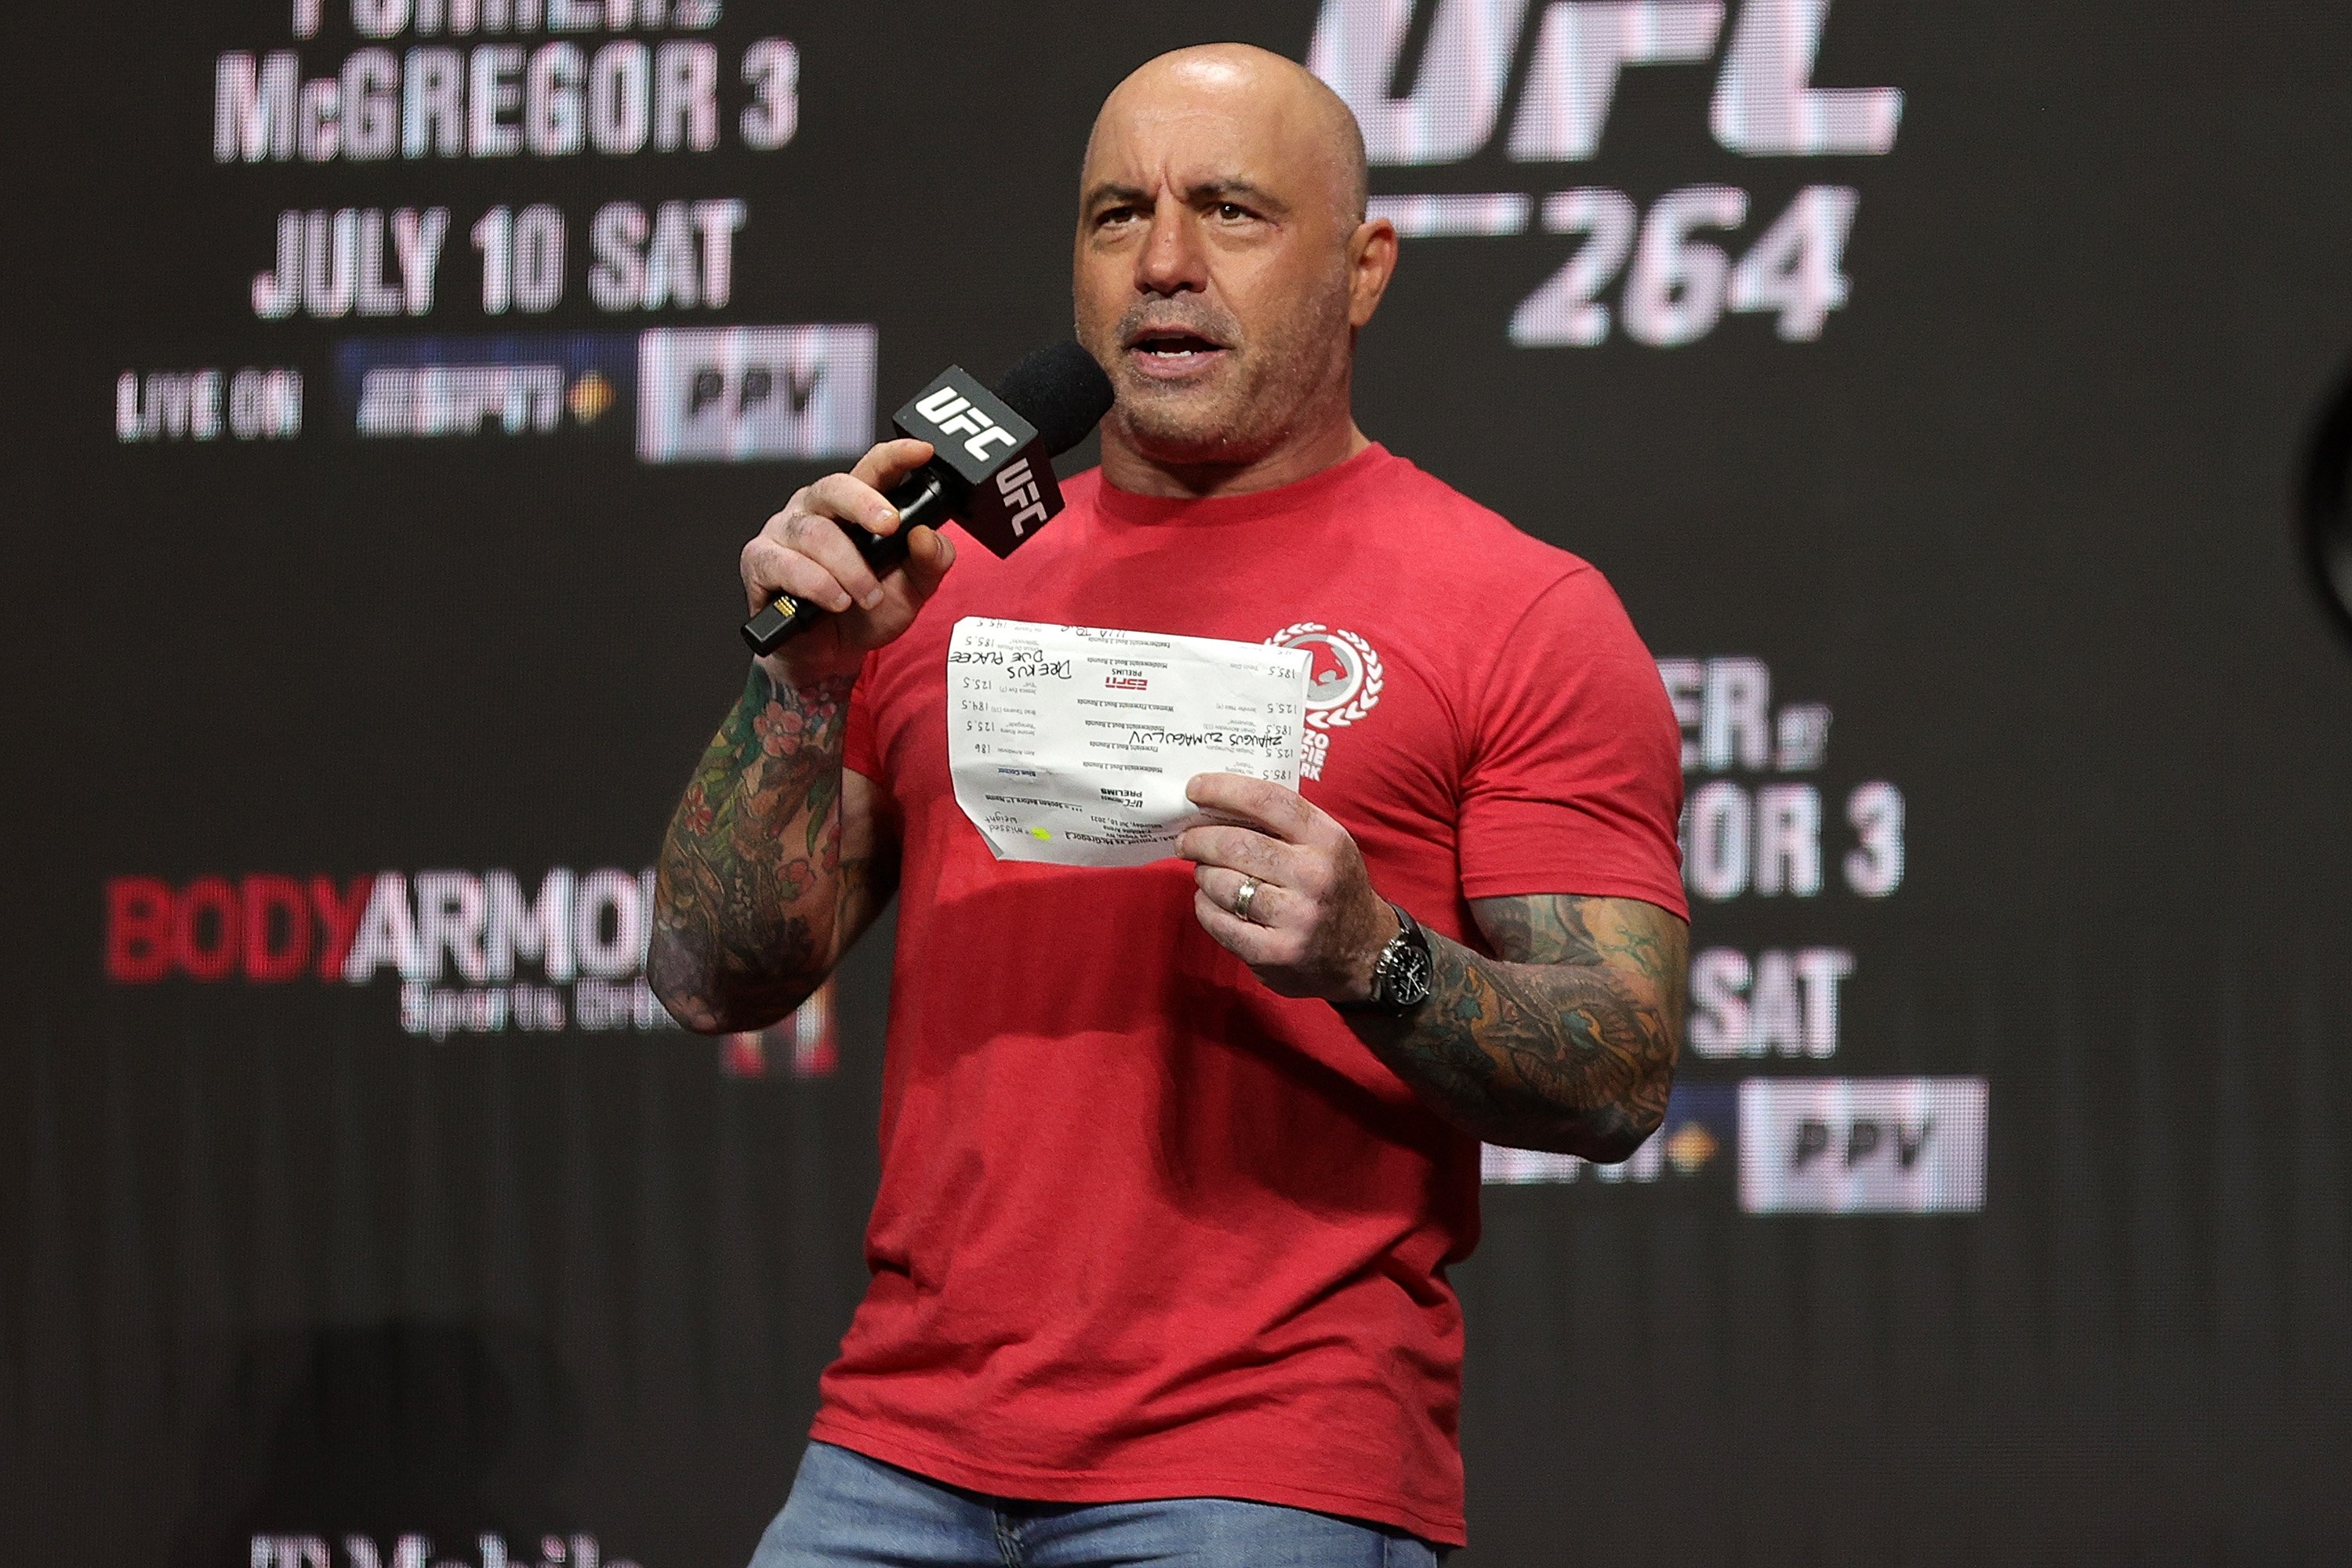 UFC commentator Joe Rogan announcing the fighters during a ceremonial weigh in for UFC 264 at T-Mobile Arena in Las Vegas, Nevada | Photo: Stacy Revere/Getty Images